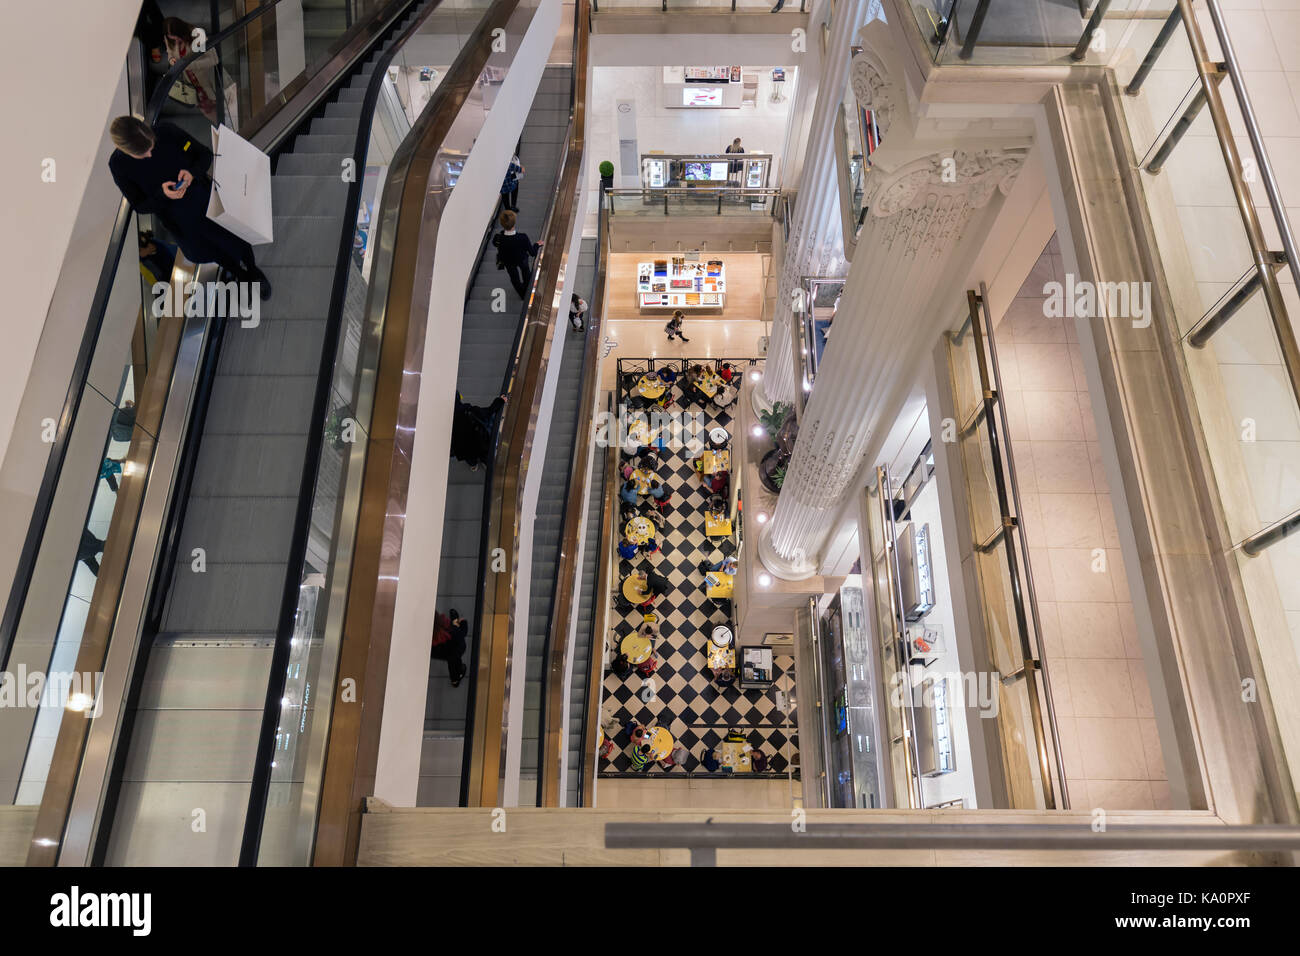 LONDON, ENGLAND - JUNE 09, 2017: Stairwell with shopping people in famous Selfridges department store London Stock Photo